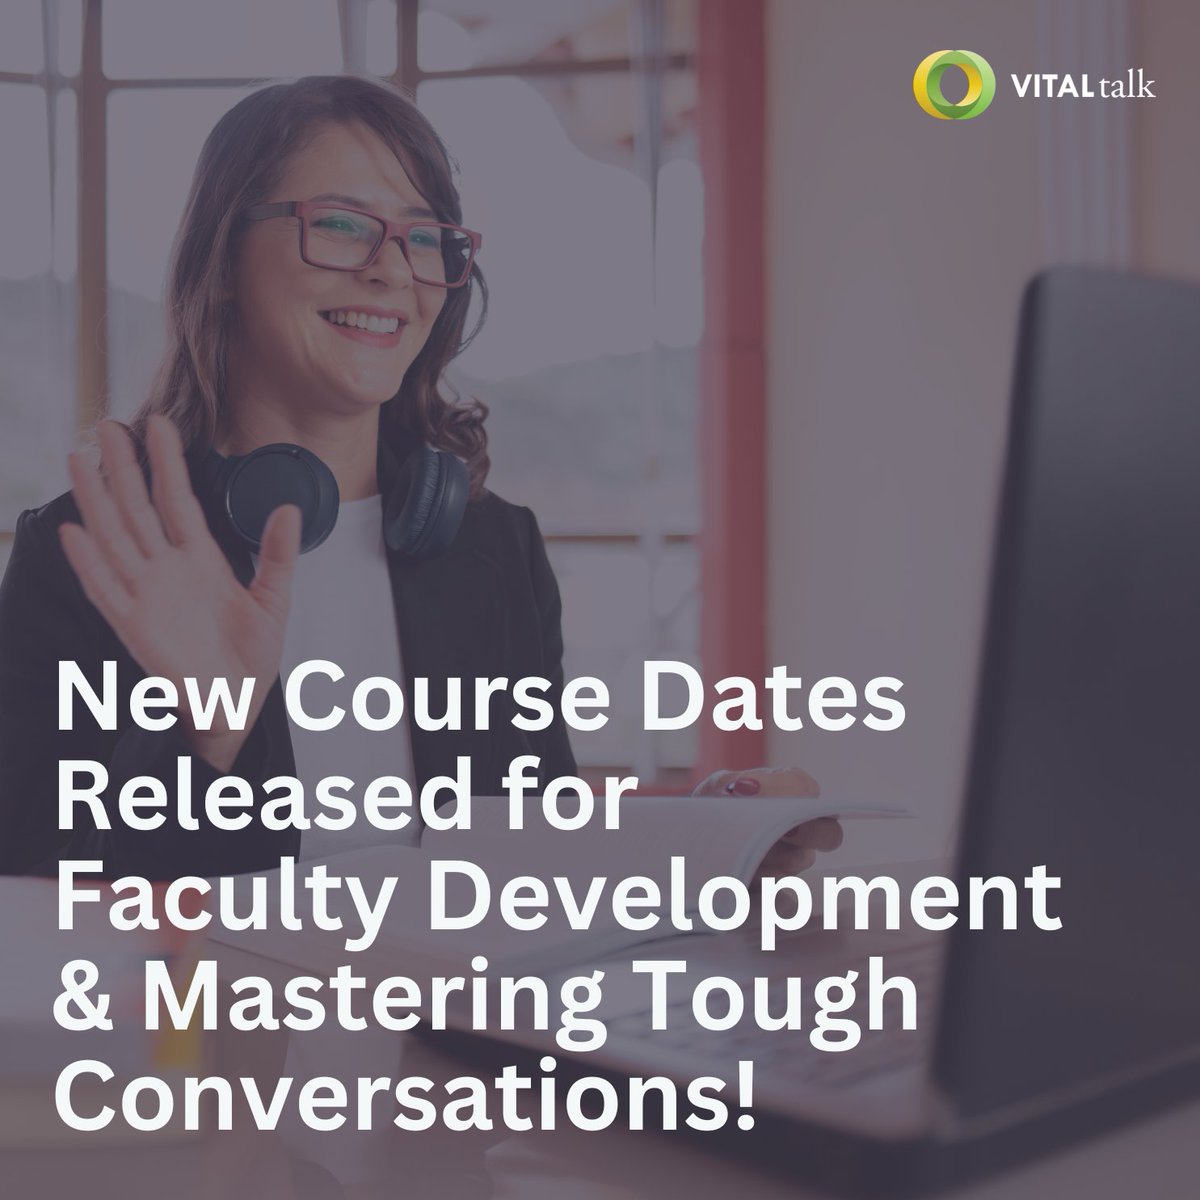 New course dates have been released for Mastering Tough Conversations and Faculty Development! Don't miss this opportunity, enroll now before spots fill up! chooseyourpath.vitaltalk.org